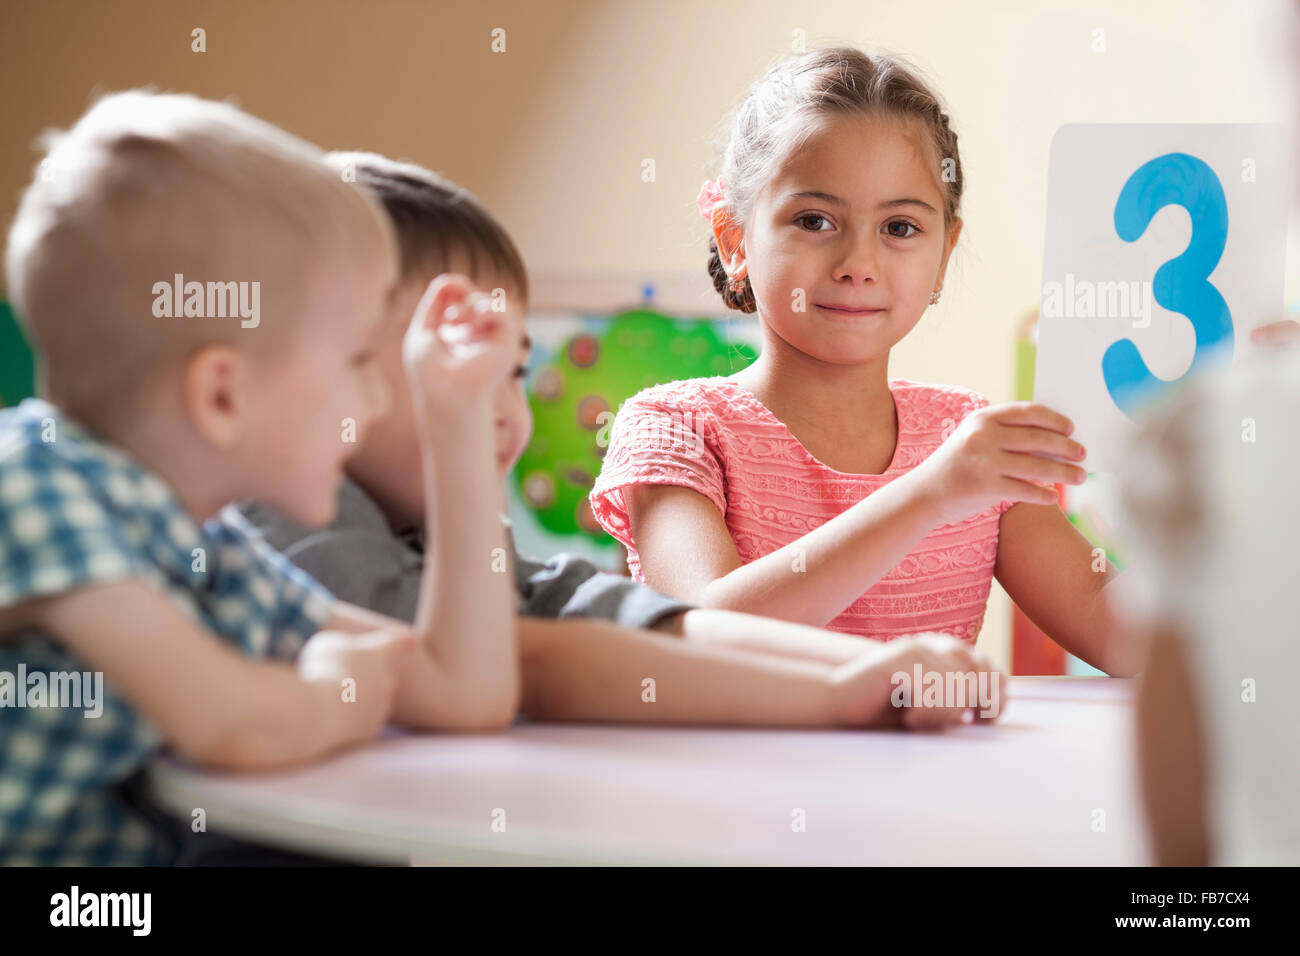 Portrait of cute girl holding number 3 placard while sitting beside friends in classroom Stock Photo